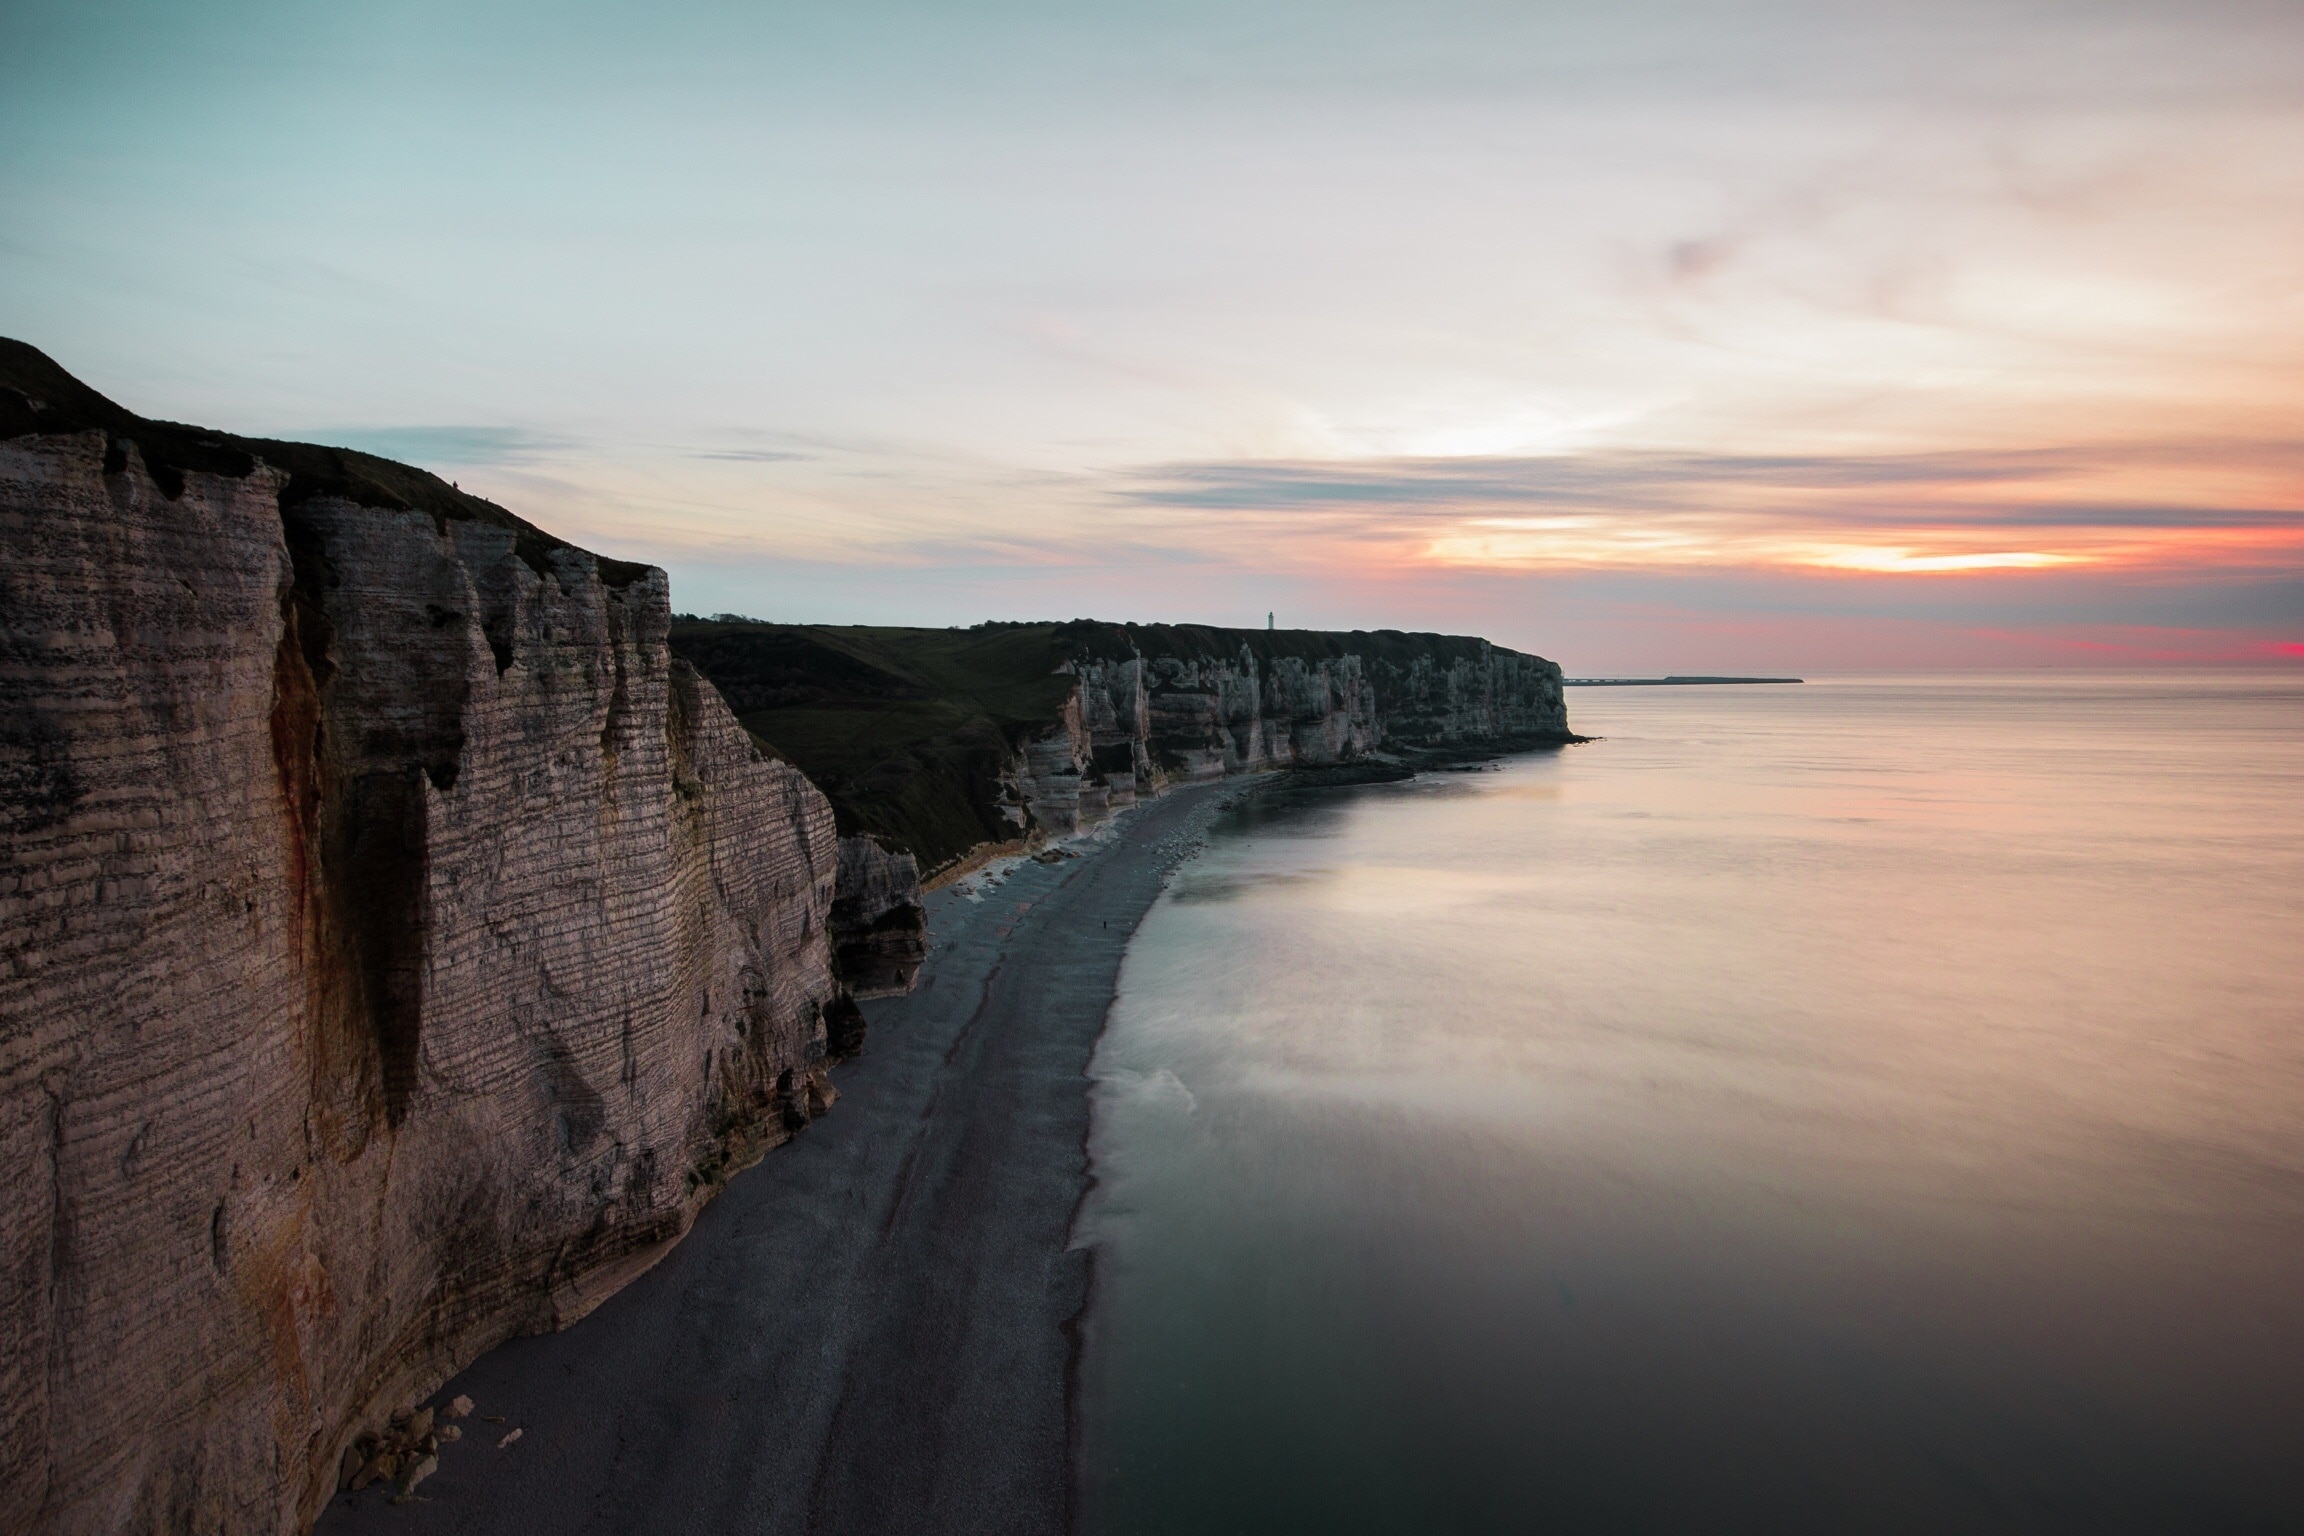 The cliffs of Étretat give you an amazing view, especially at sunrise or sunset, and are excellent for both hikers and beach chillers alike.
#beachtips